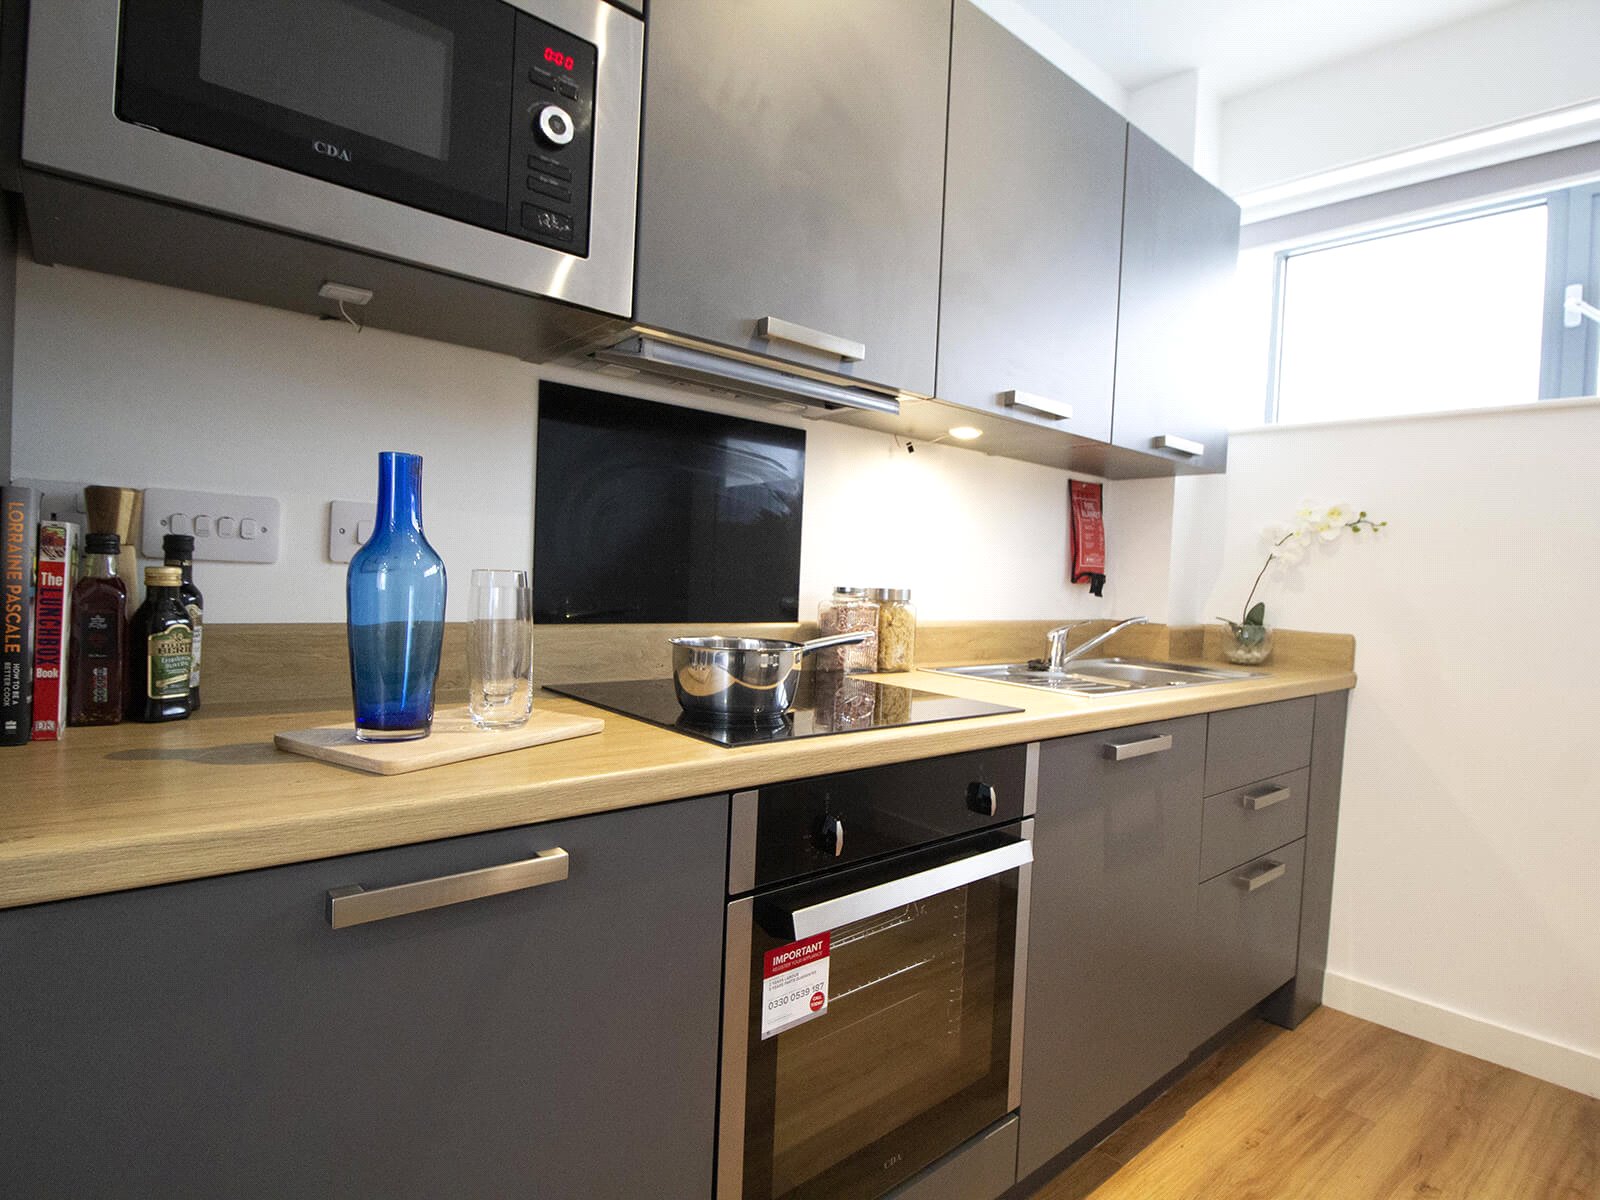 2 bed apartment for rent in Liverpool. From YPP - Sheffield